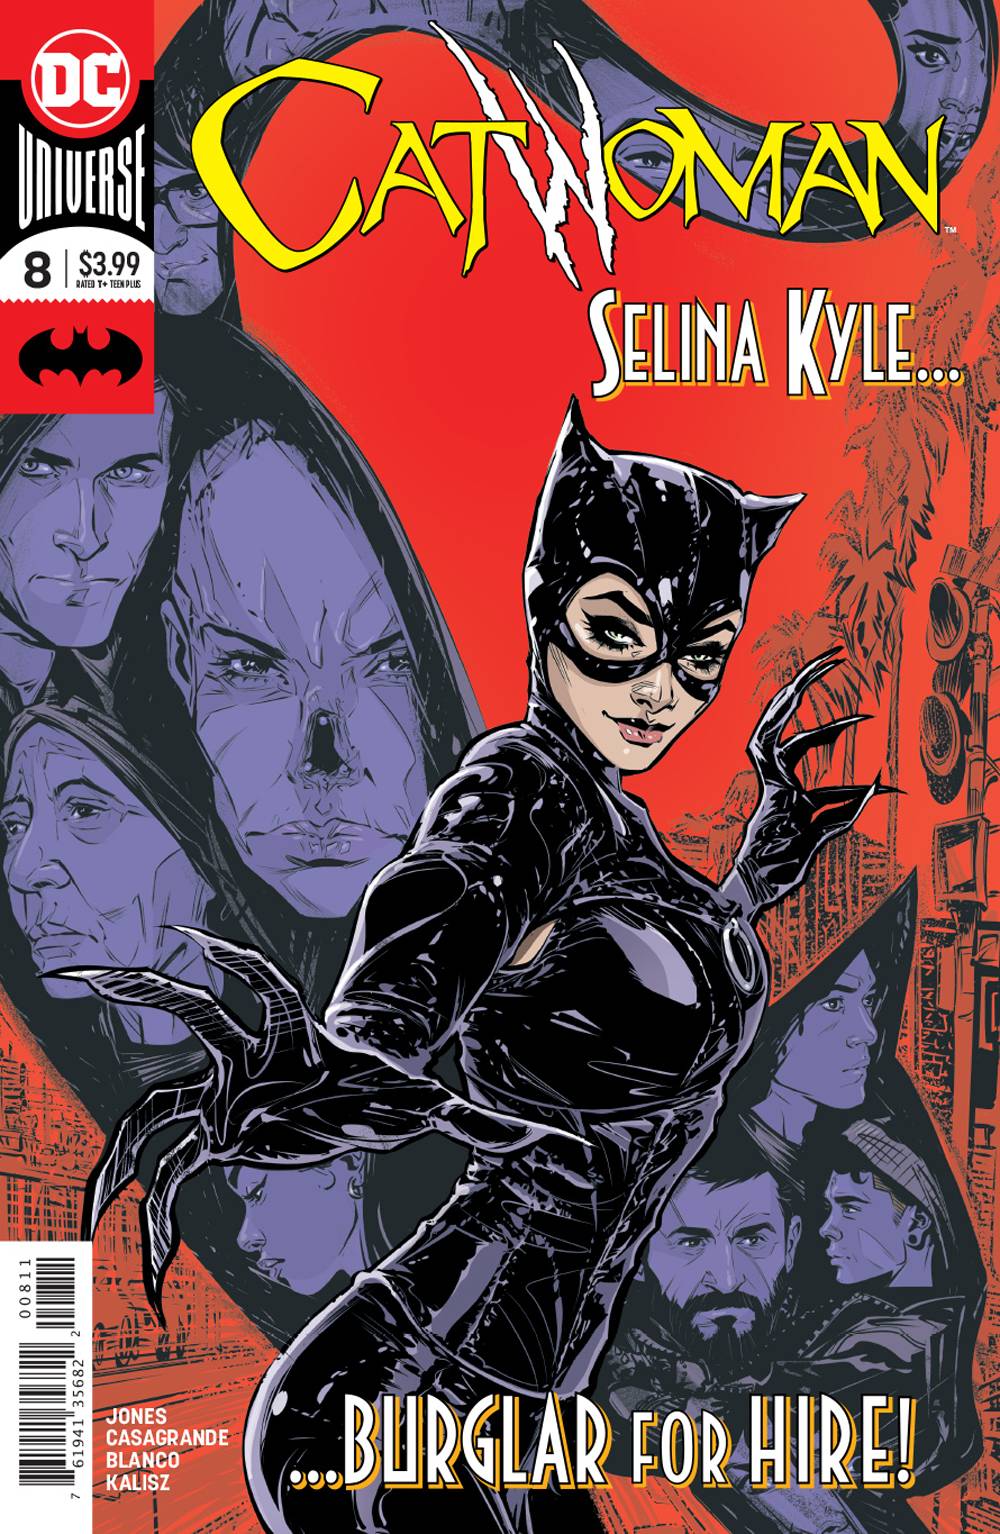 Catwoman #8 [2019]